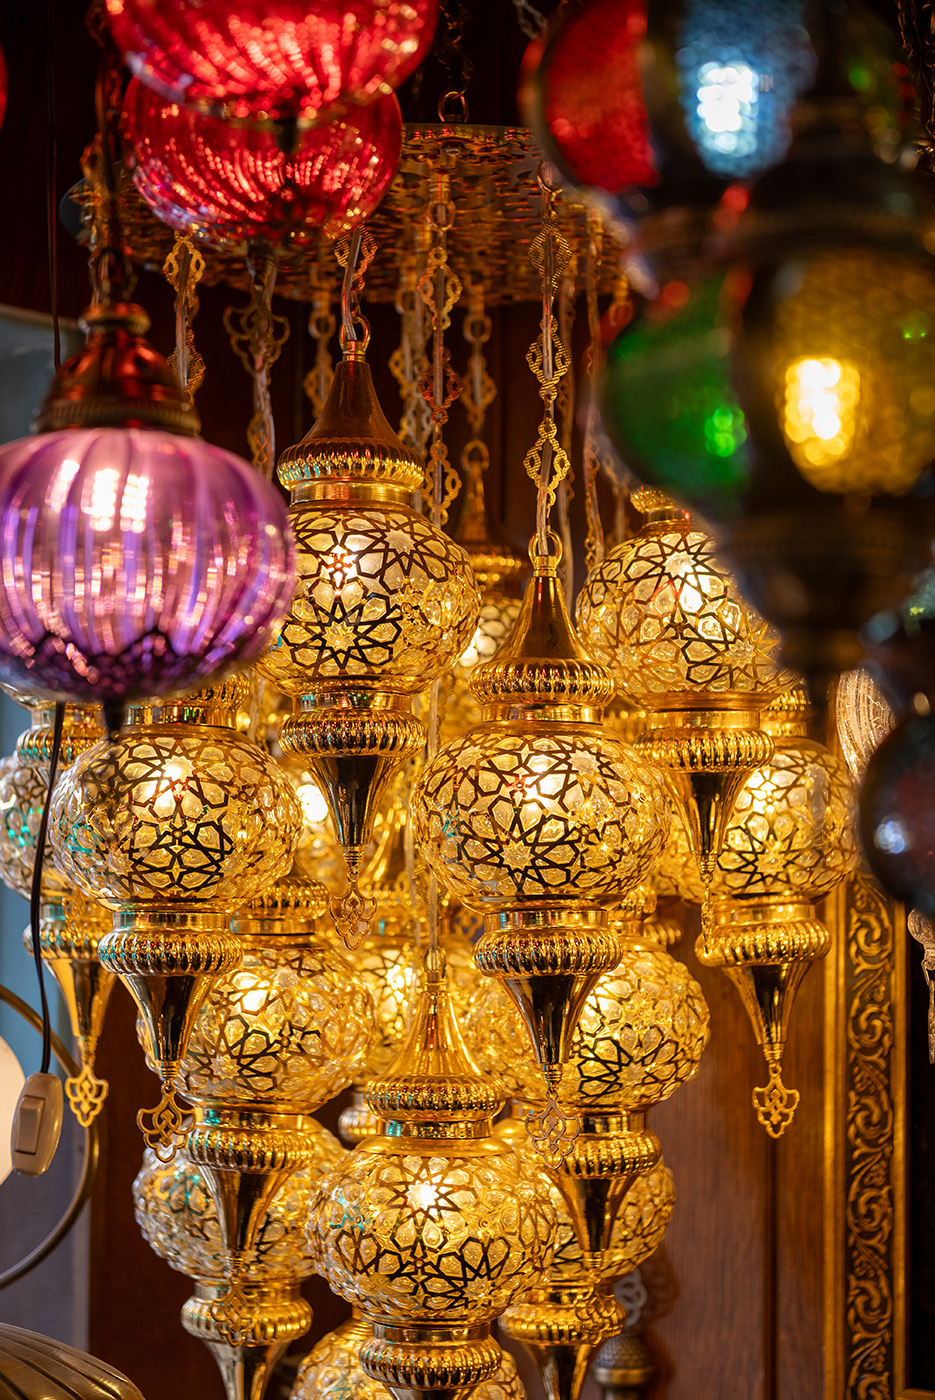 A chandelier of Turkish lamps